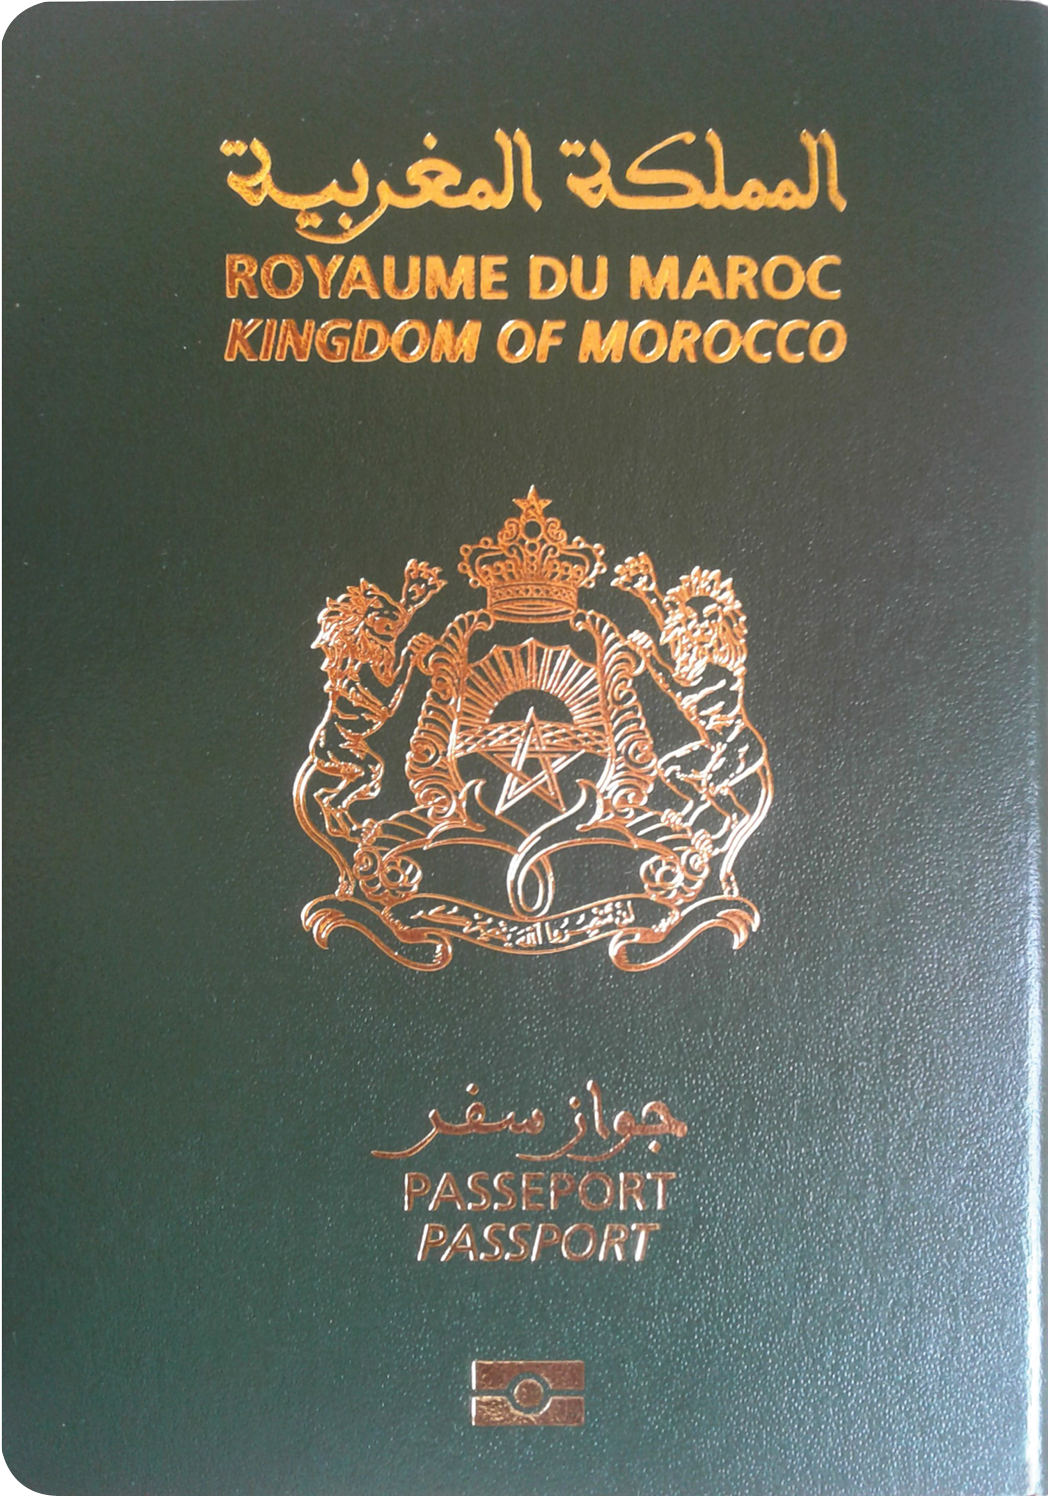 A regular or ordinary Moroccan passport - Front side